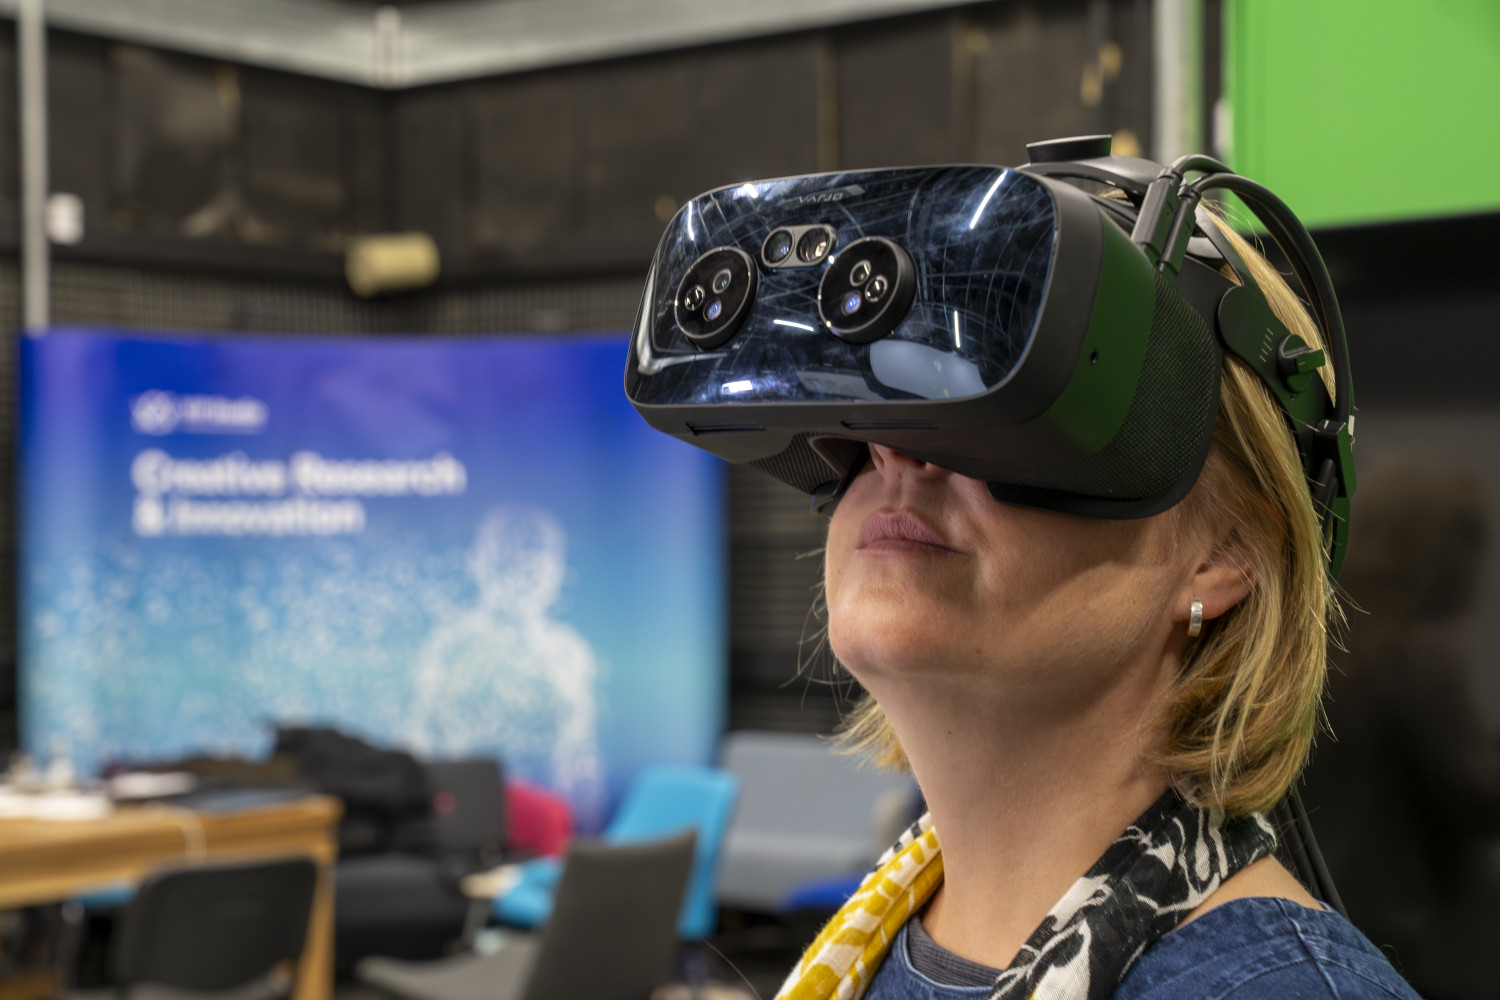 Woman wearing a vr headset with banner in the background that says ‘creative research and innovation’